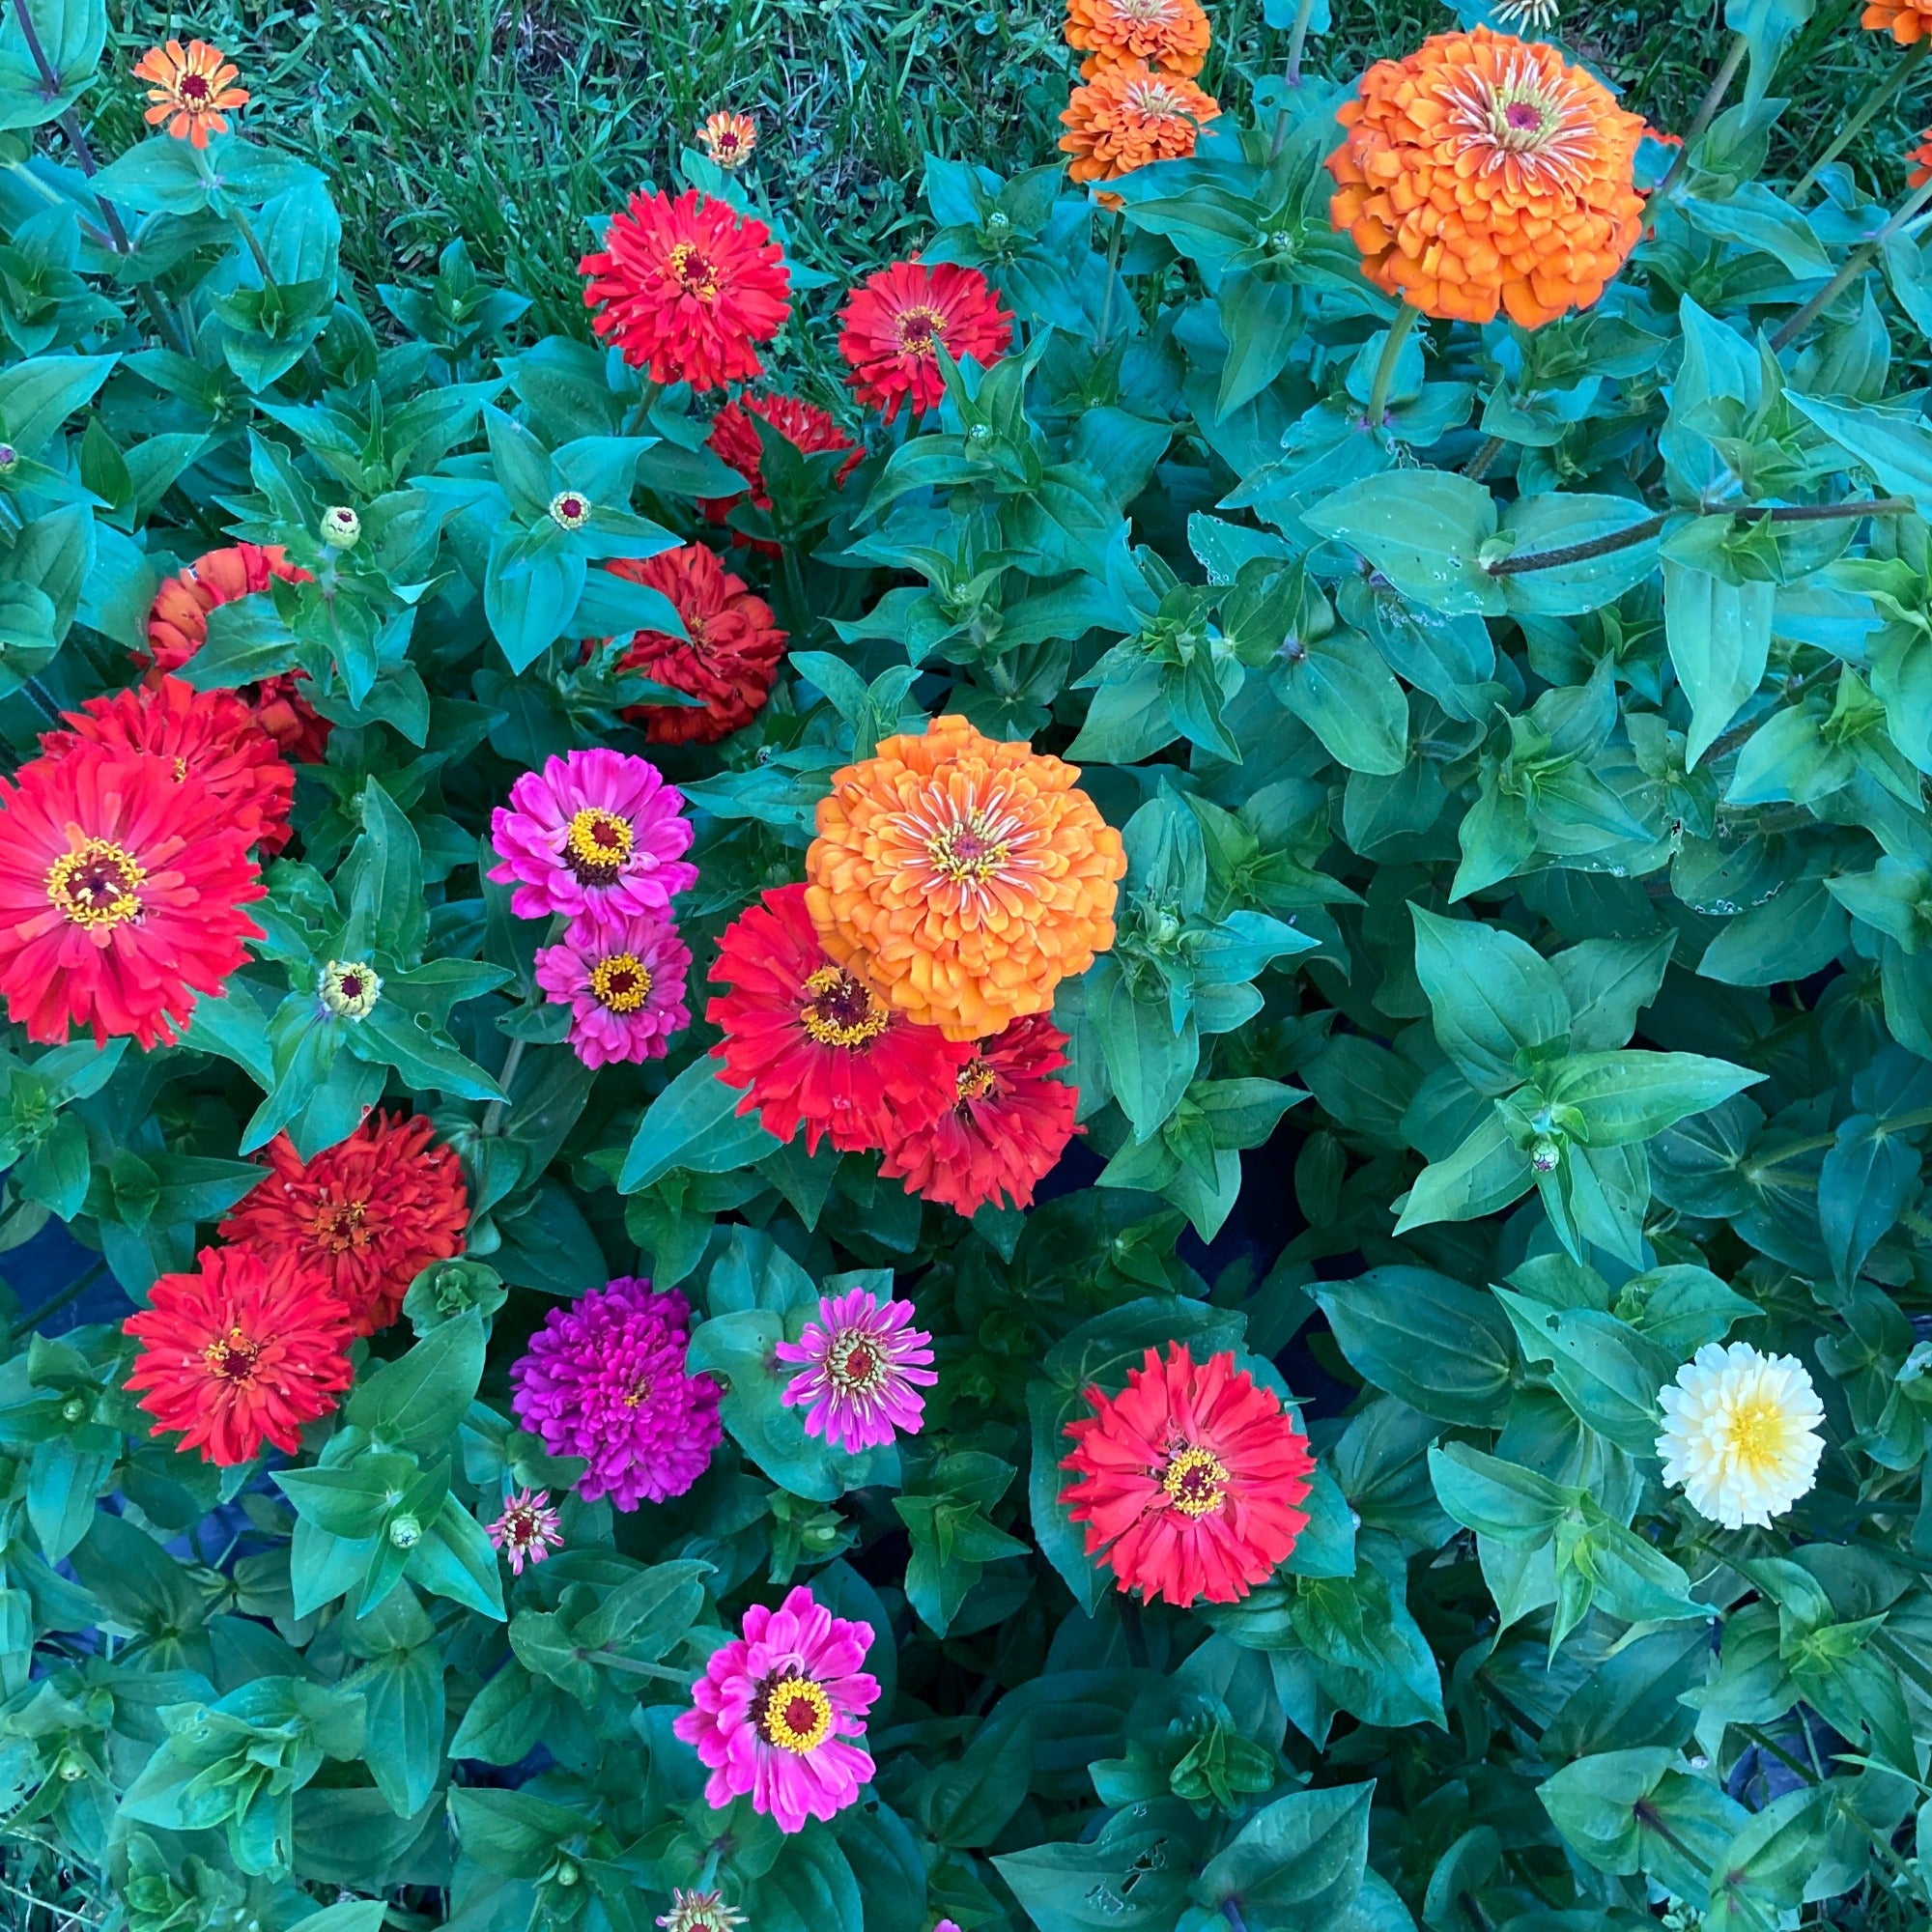 Jim Bagget Zinnia Mix growing in a garden with orange, red, magenta, purple, and white blooms and grass growing behind